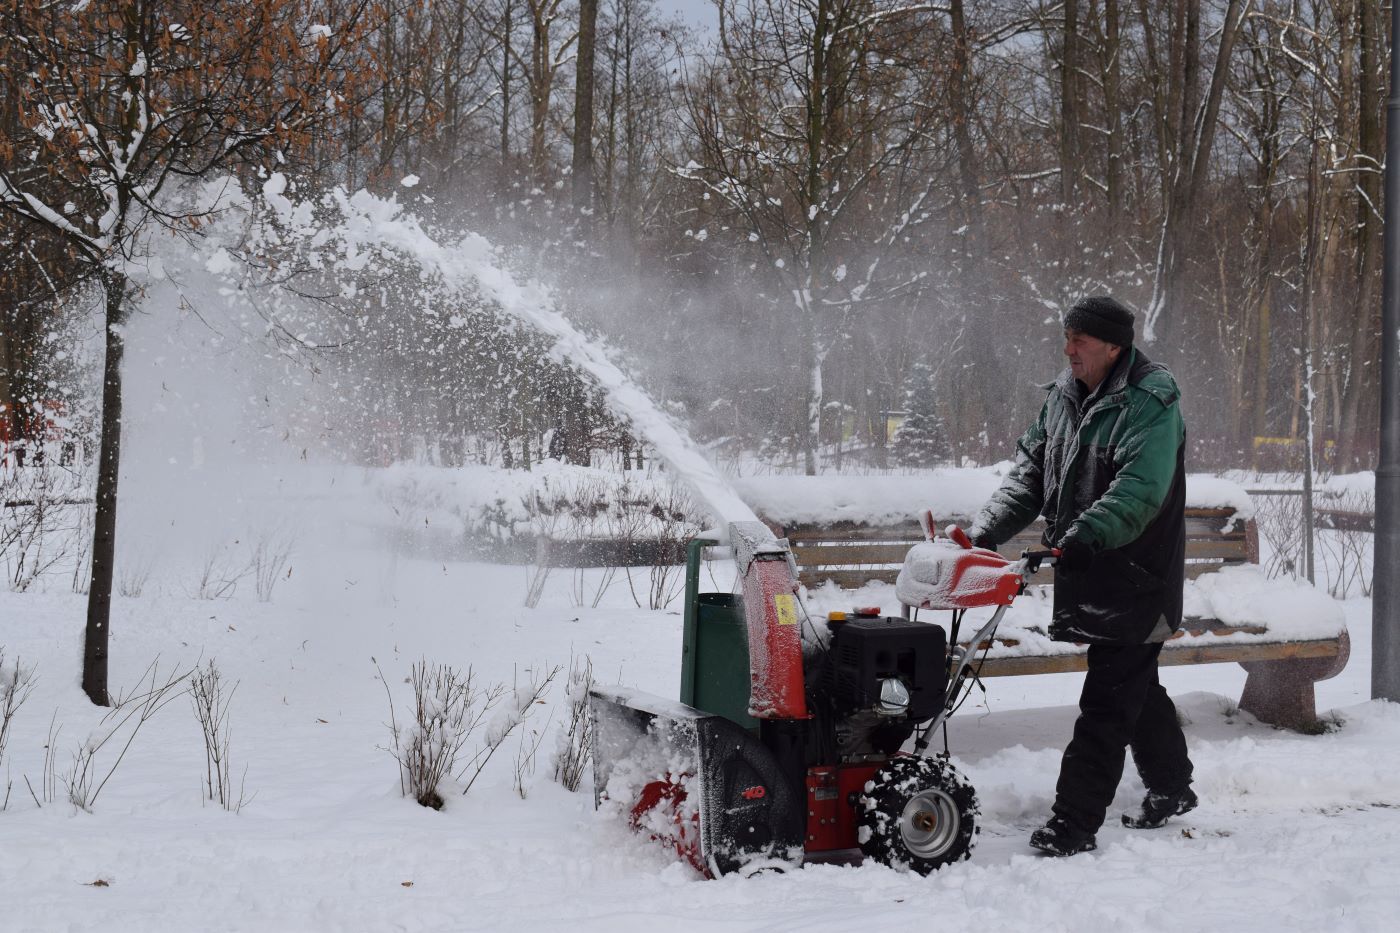 A person with a green jacket using a snow blower